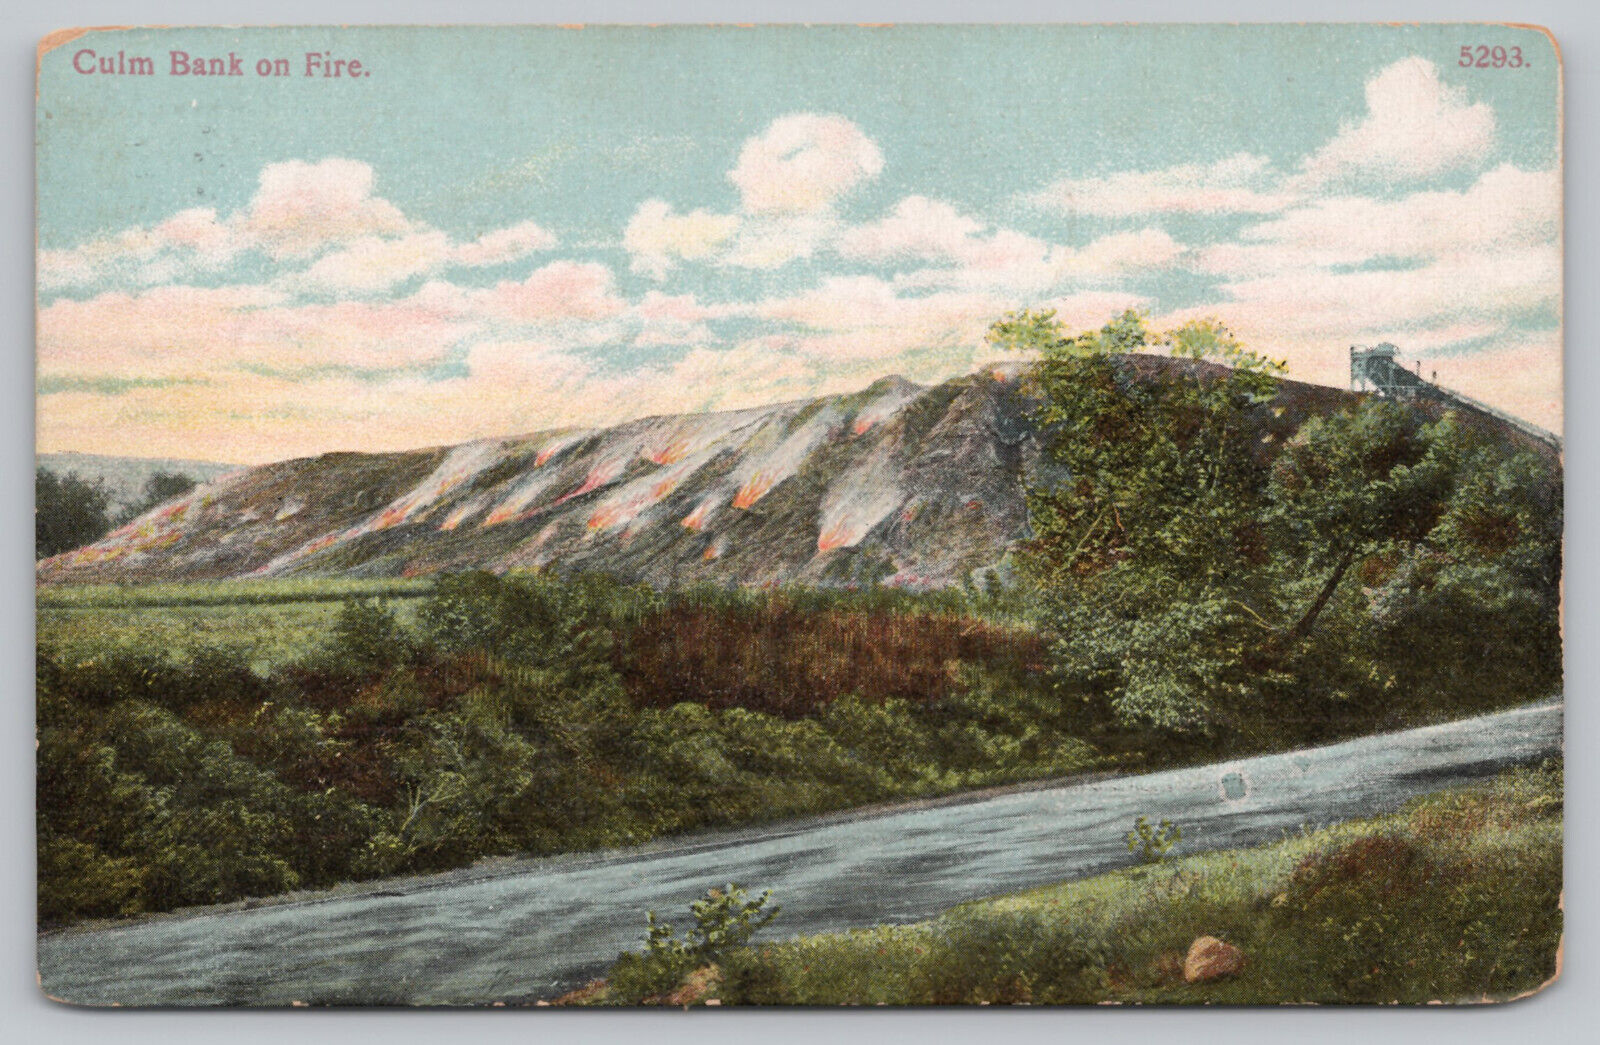 Wilkes Barre PA Pennsylvania - Culm Banks on Fire - Anthracite Coal Mining 1908